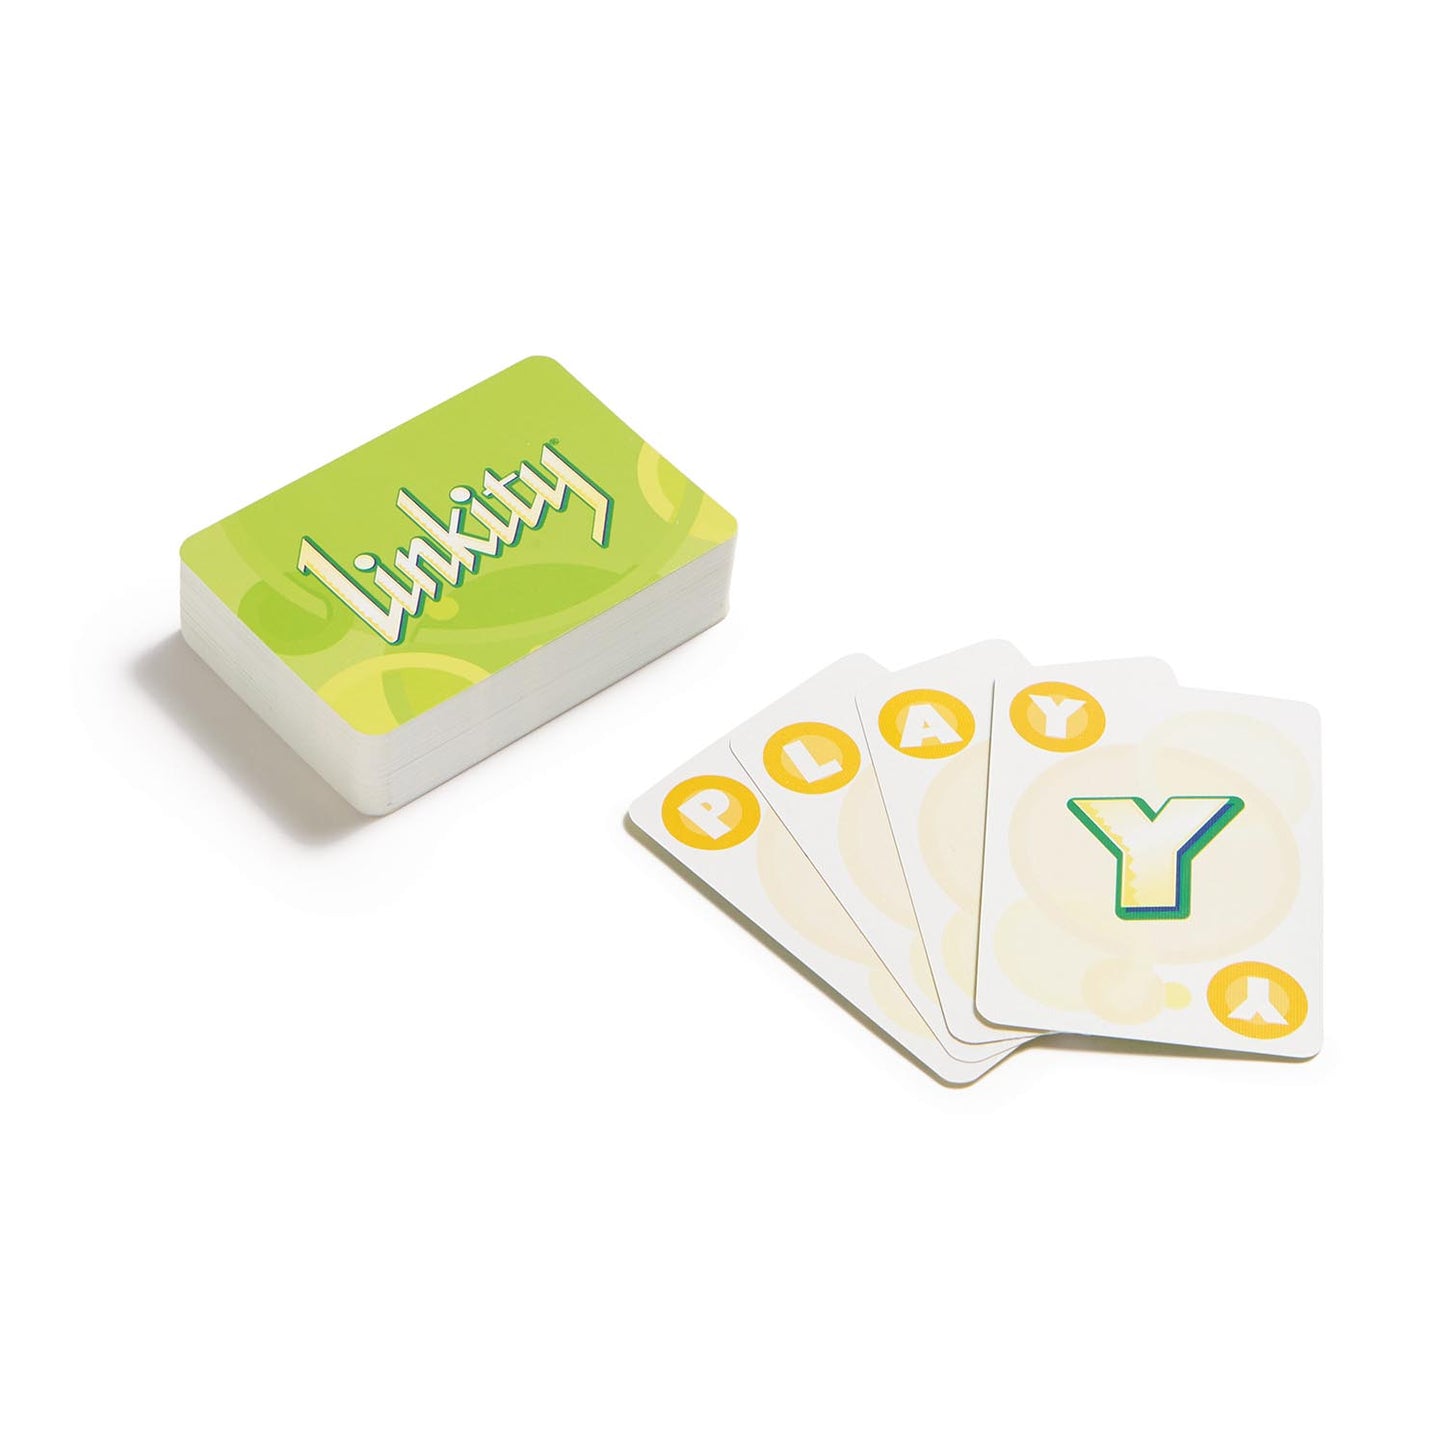 Linkity- Word Association & Vocabulary Card Game | Ages 8+